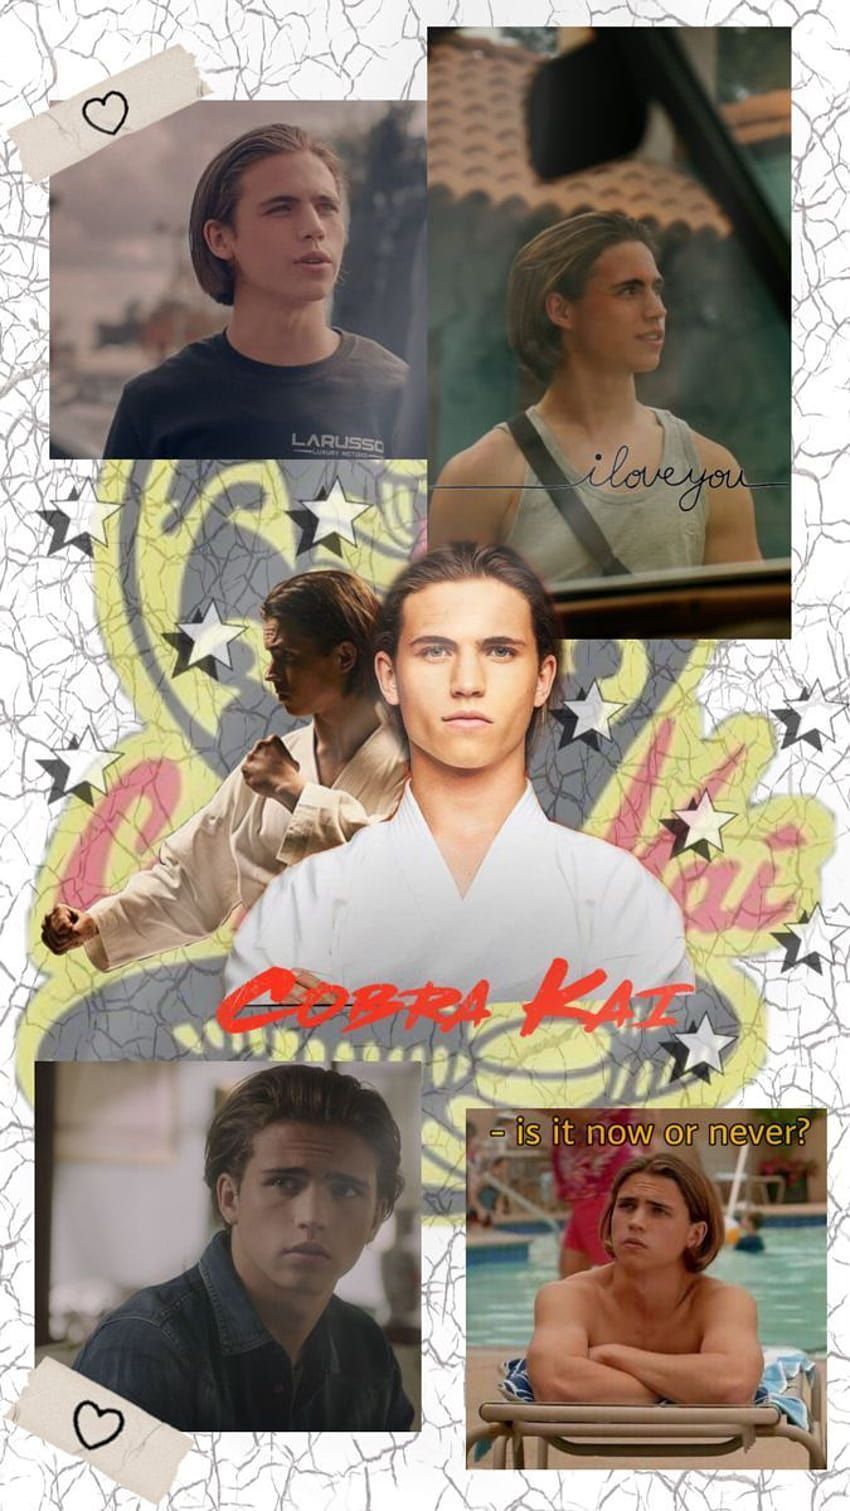 Collage of pictures of the actor Zac Efron - Cobra Kai